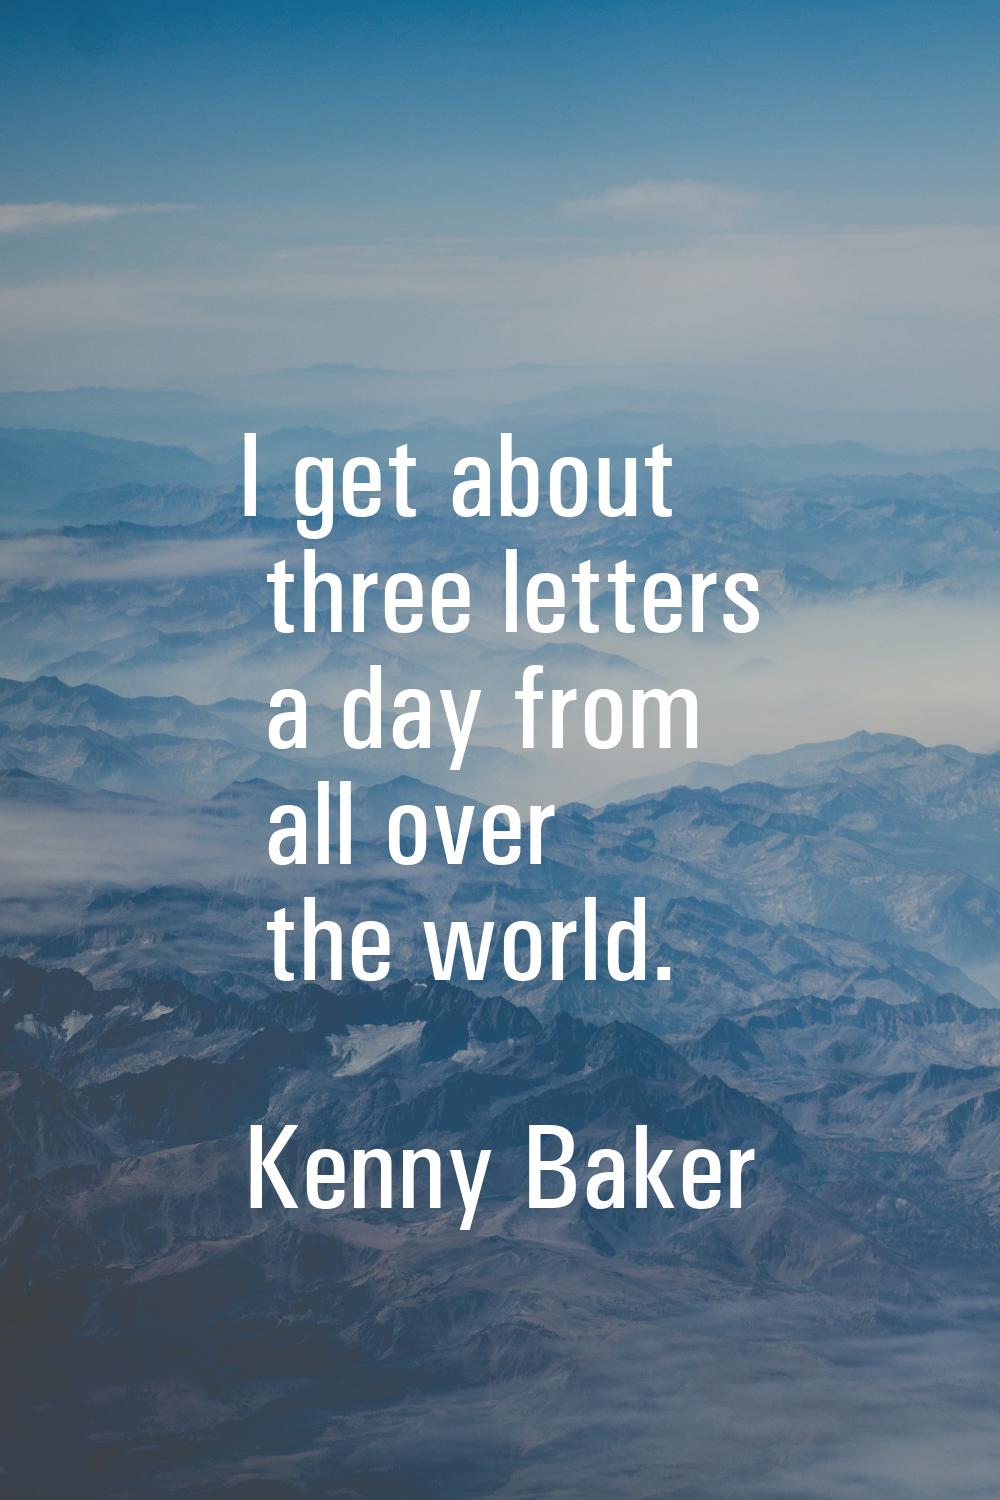 I get about three letters a day from all over the world.